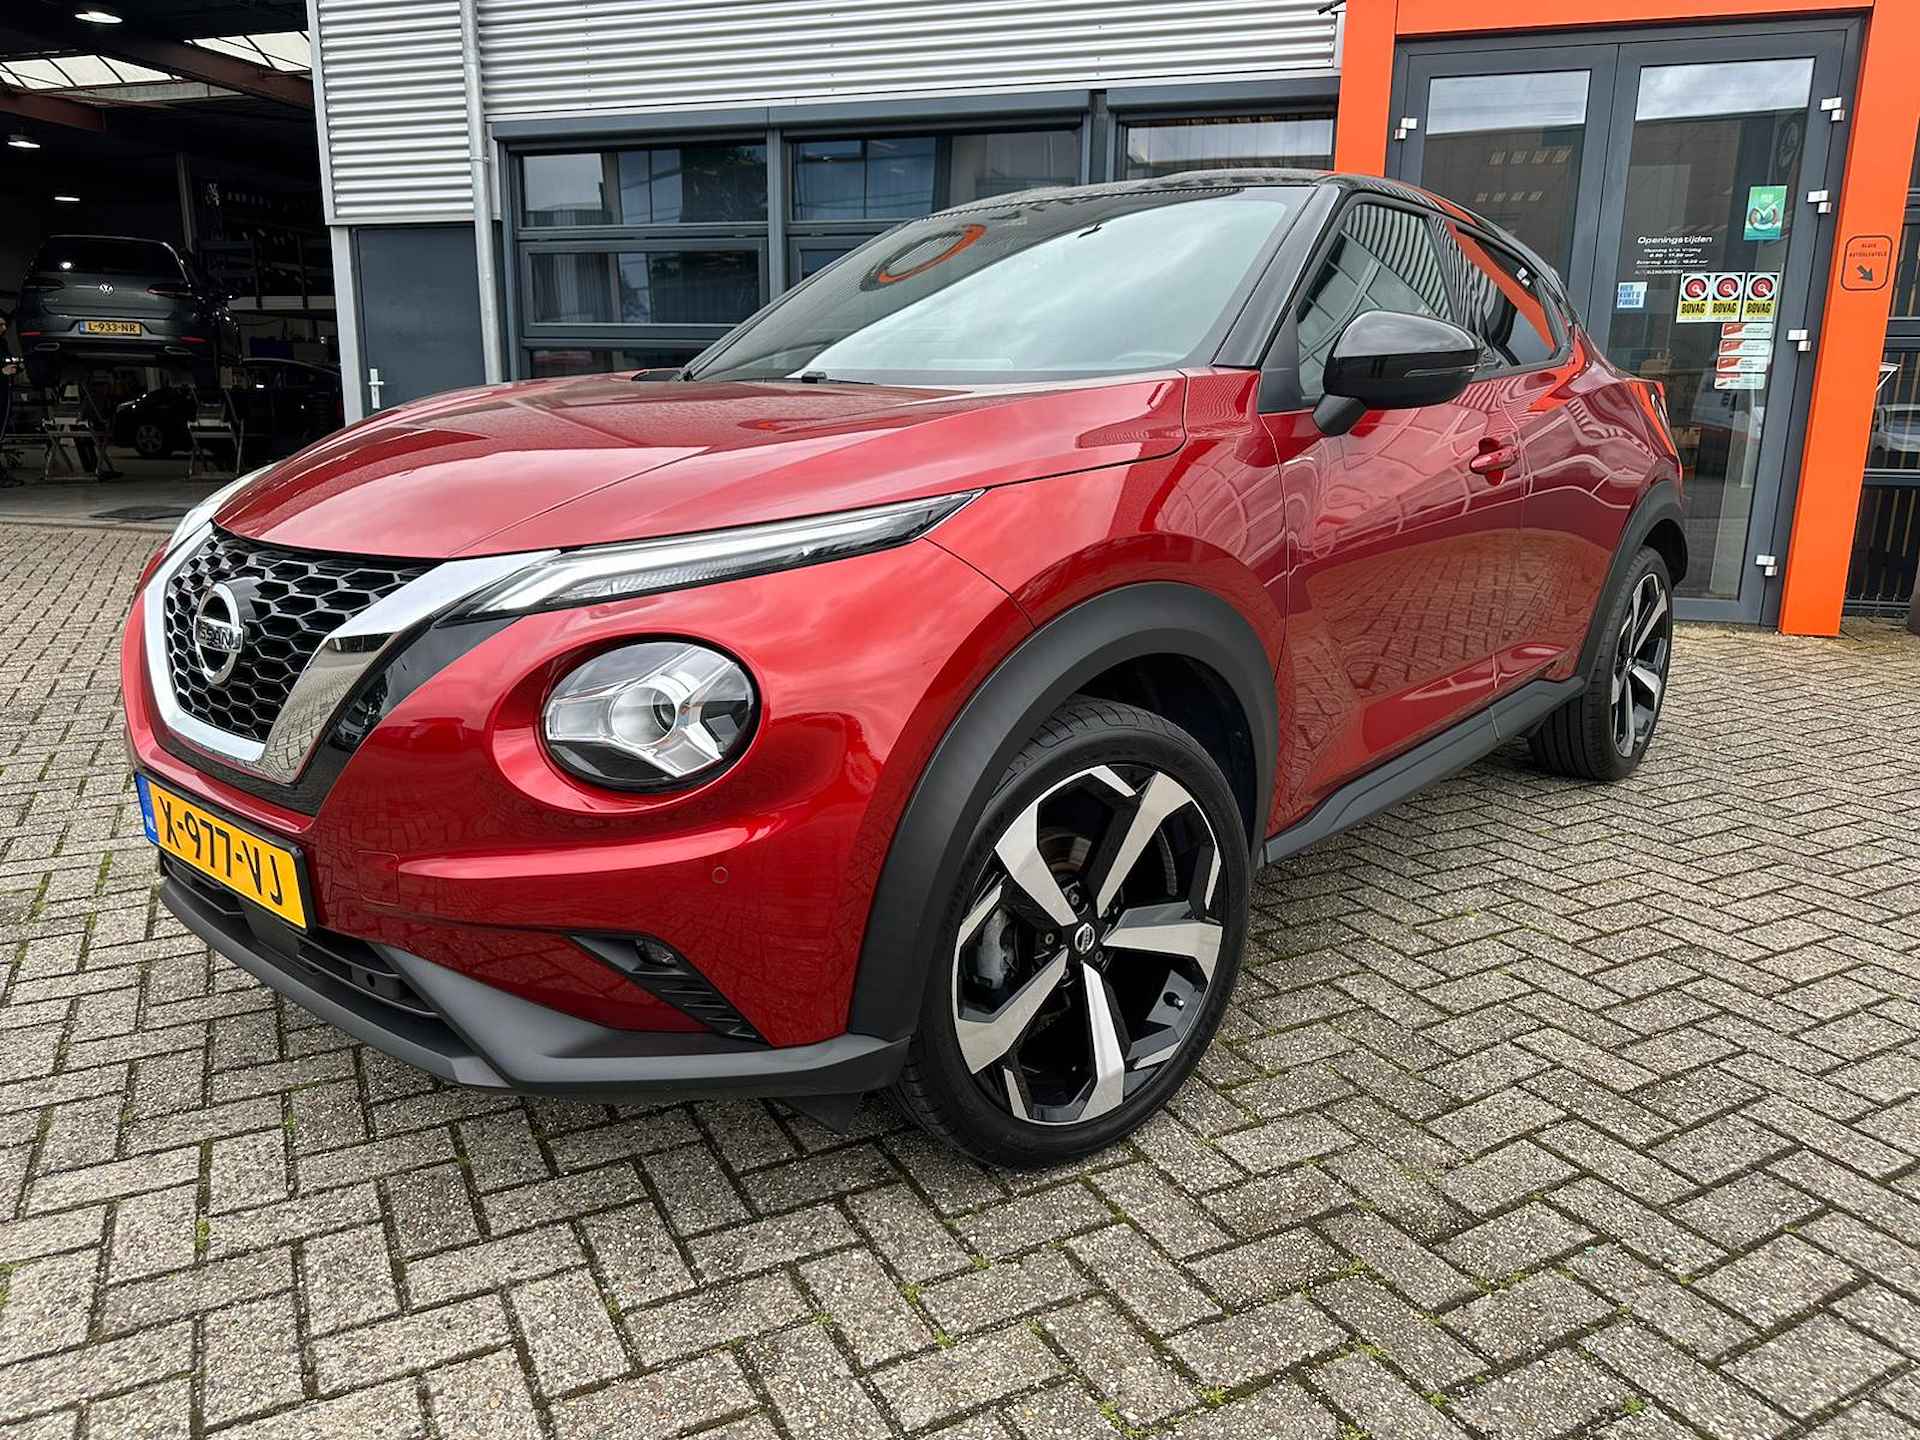 Nissan Juke 1.0 DIG-T Premiere Edition Automaat Apple/Android Carply / Navi / Camera / 19 inch / Cruise Control / Keyless / Start/stop - 3/25